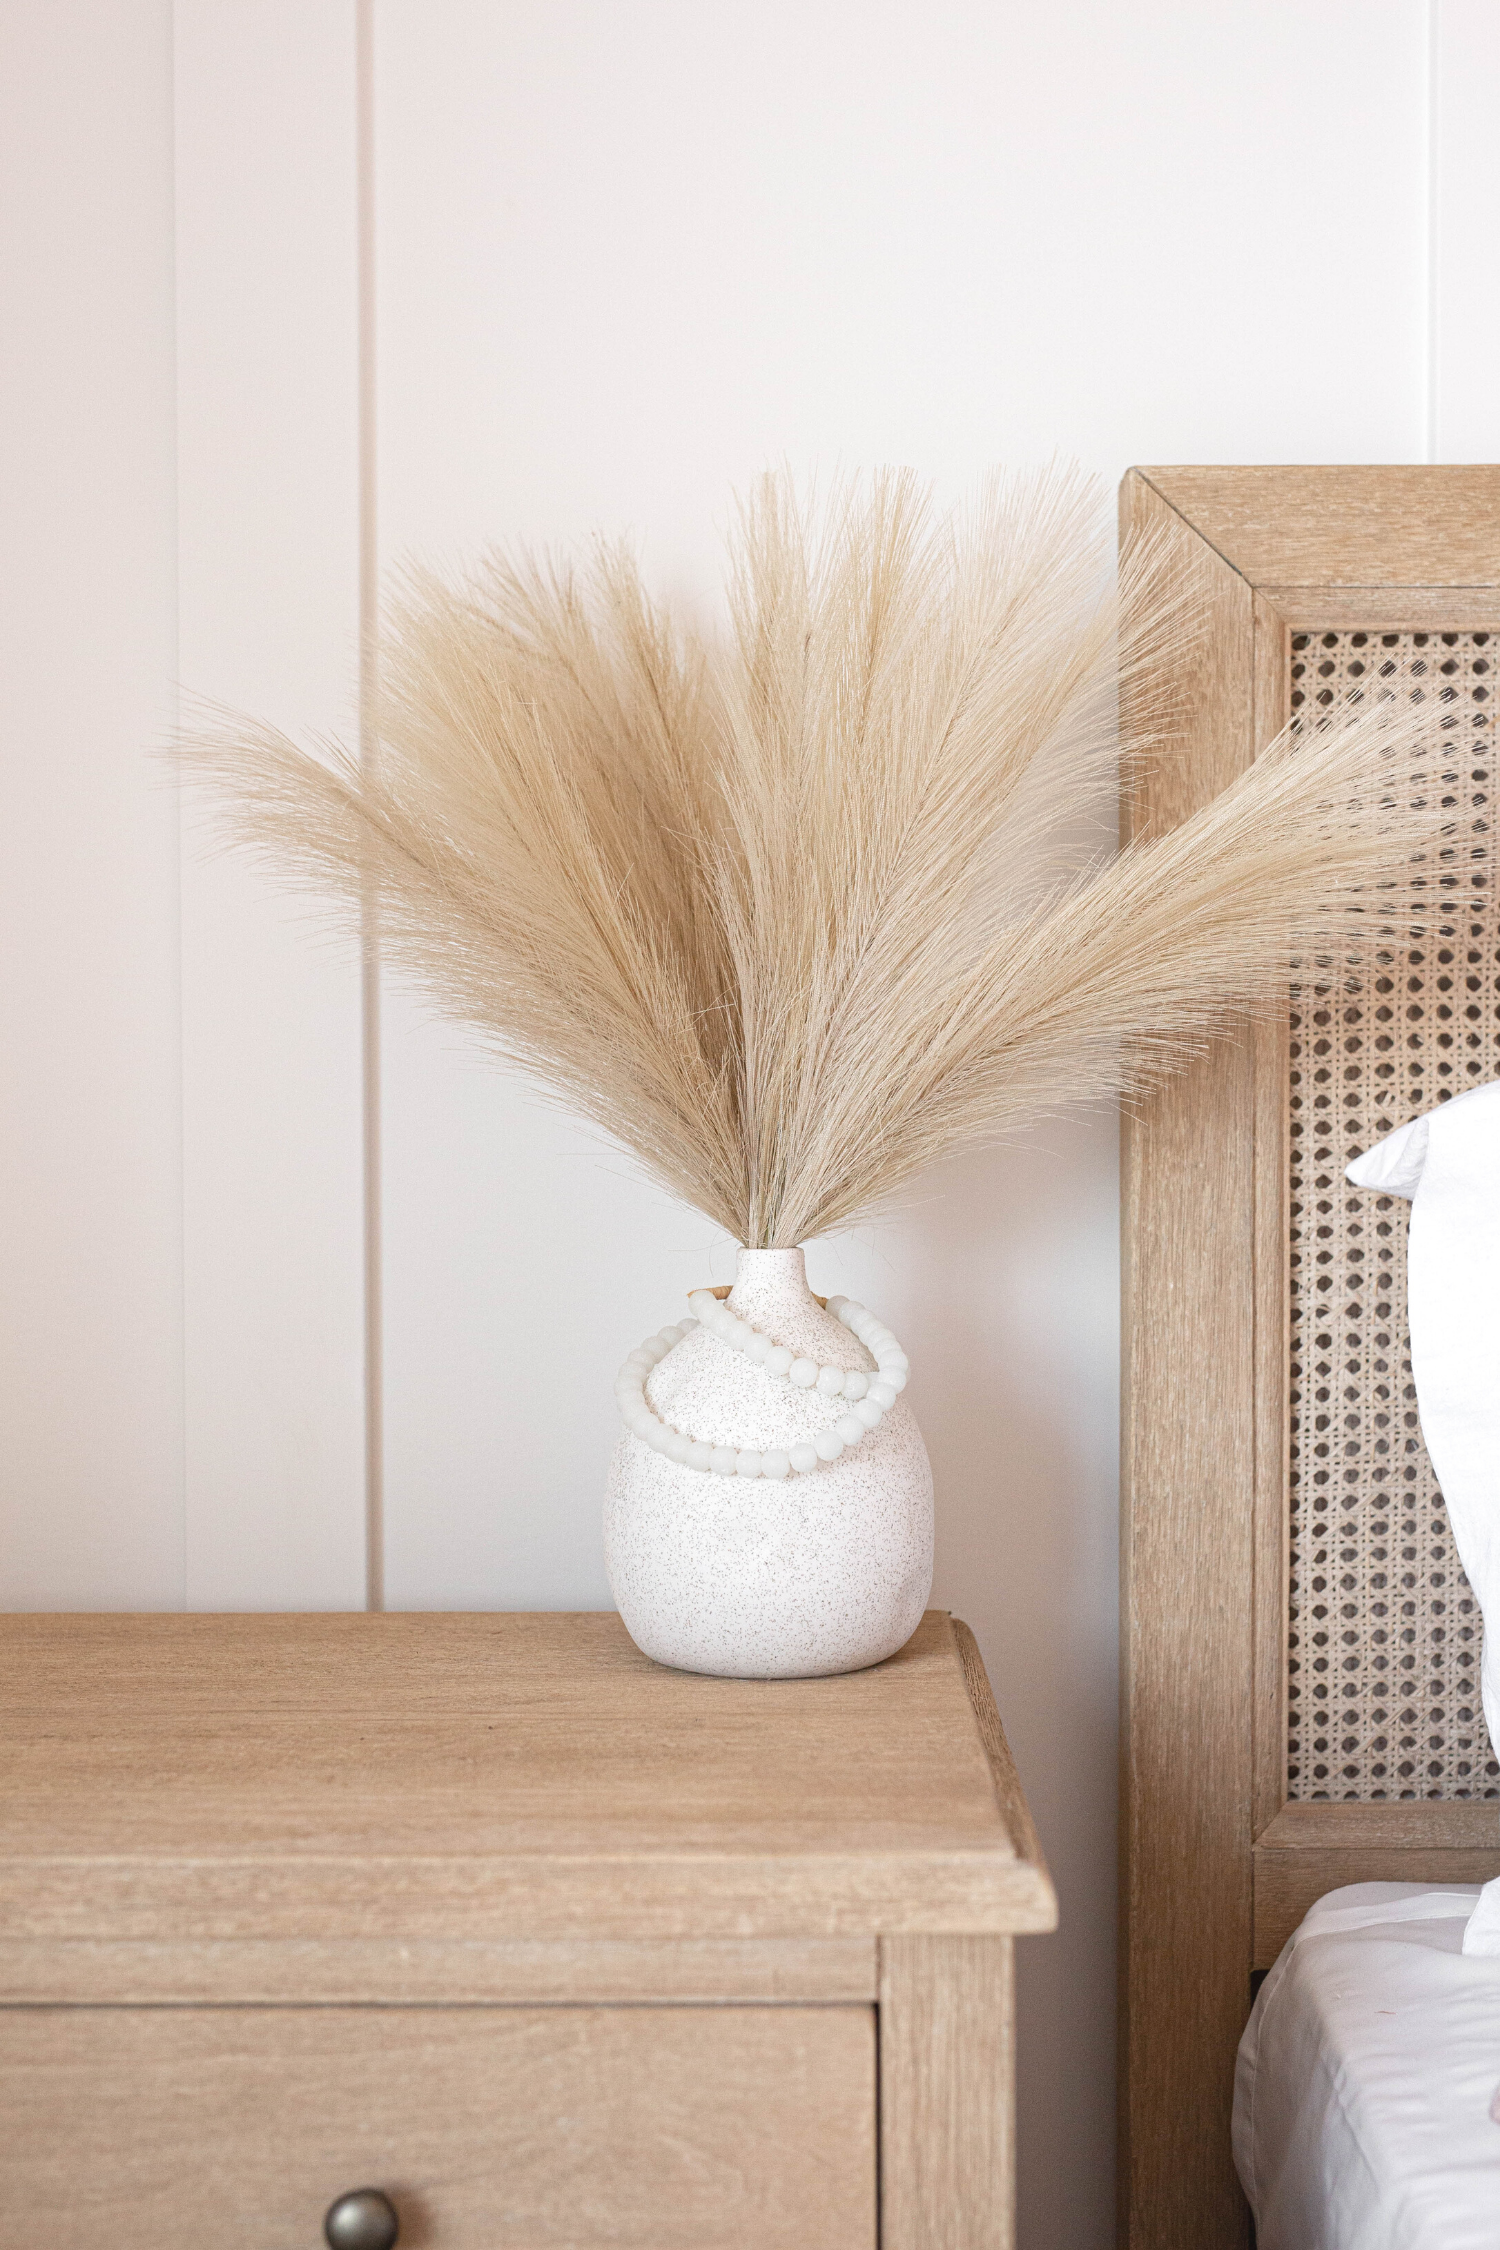 Luxe B "Faux" Accent Artificial Pampas Grass in Taupe Sand + Mojave Vase Promo Pack - Luxe B Co